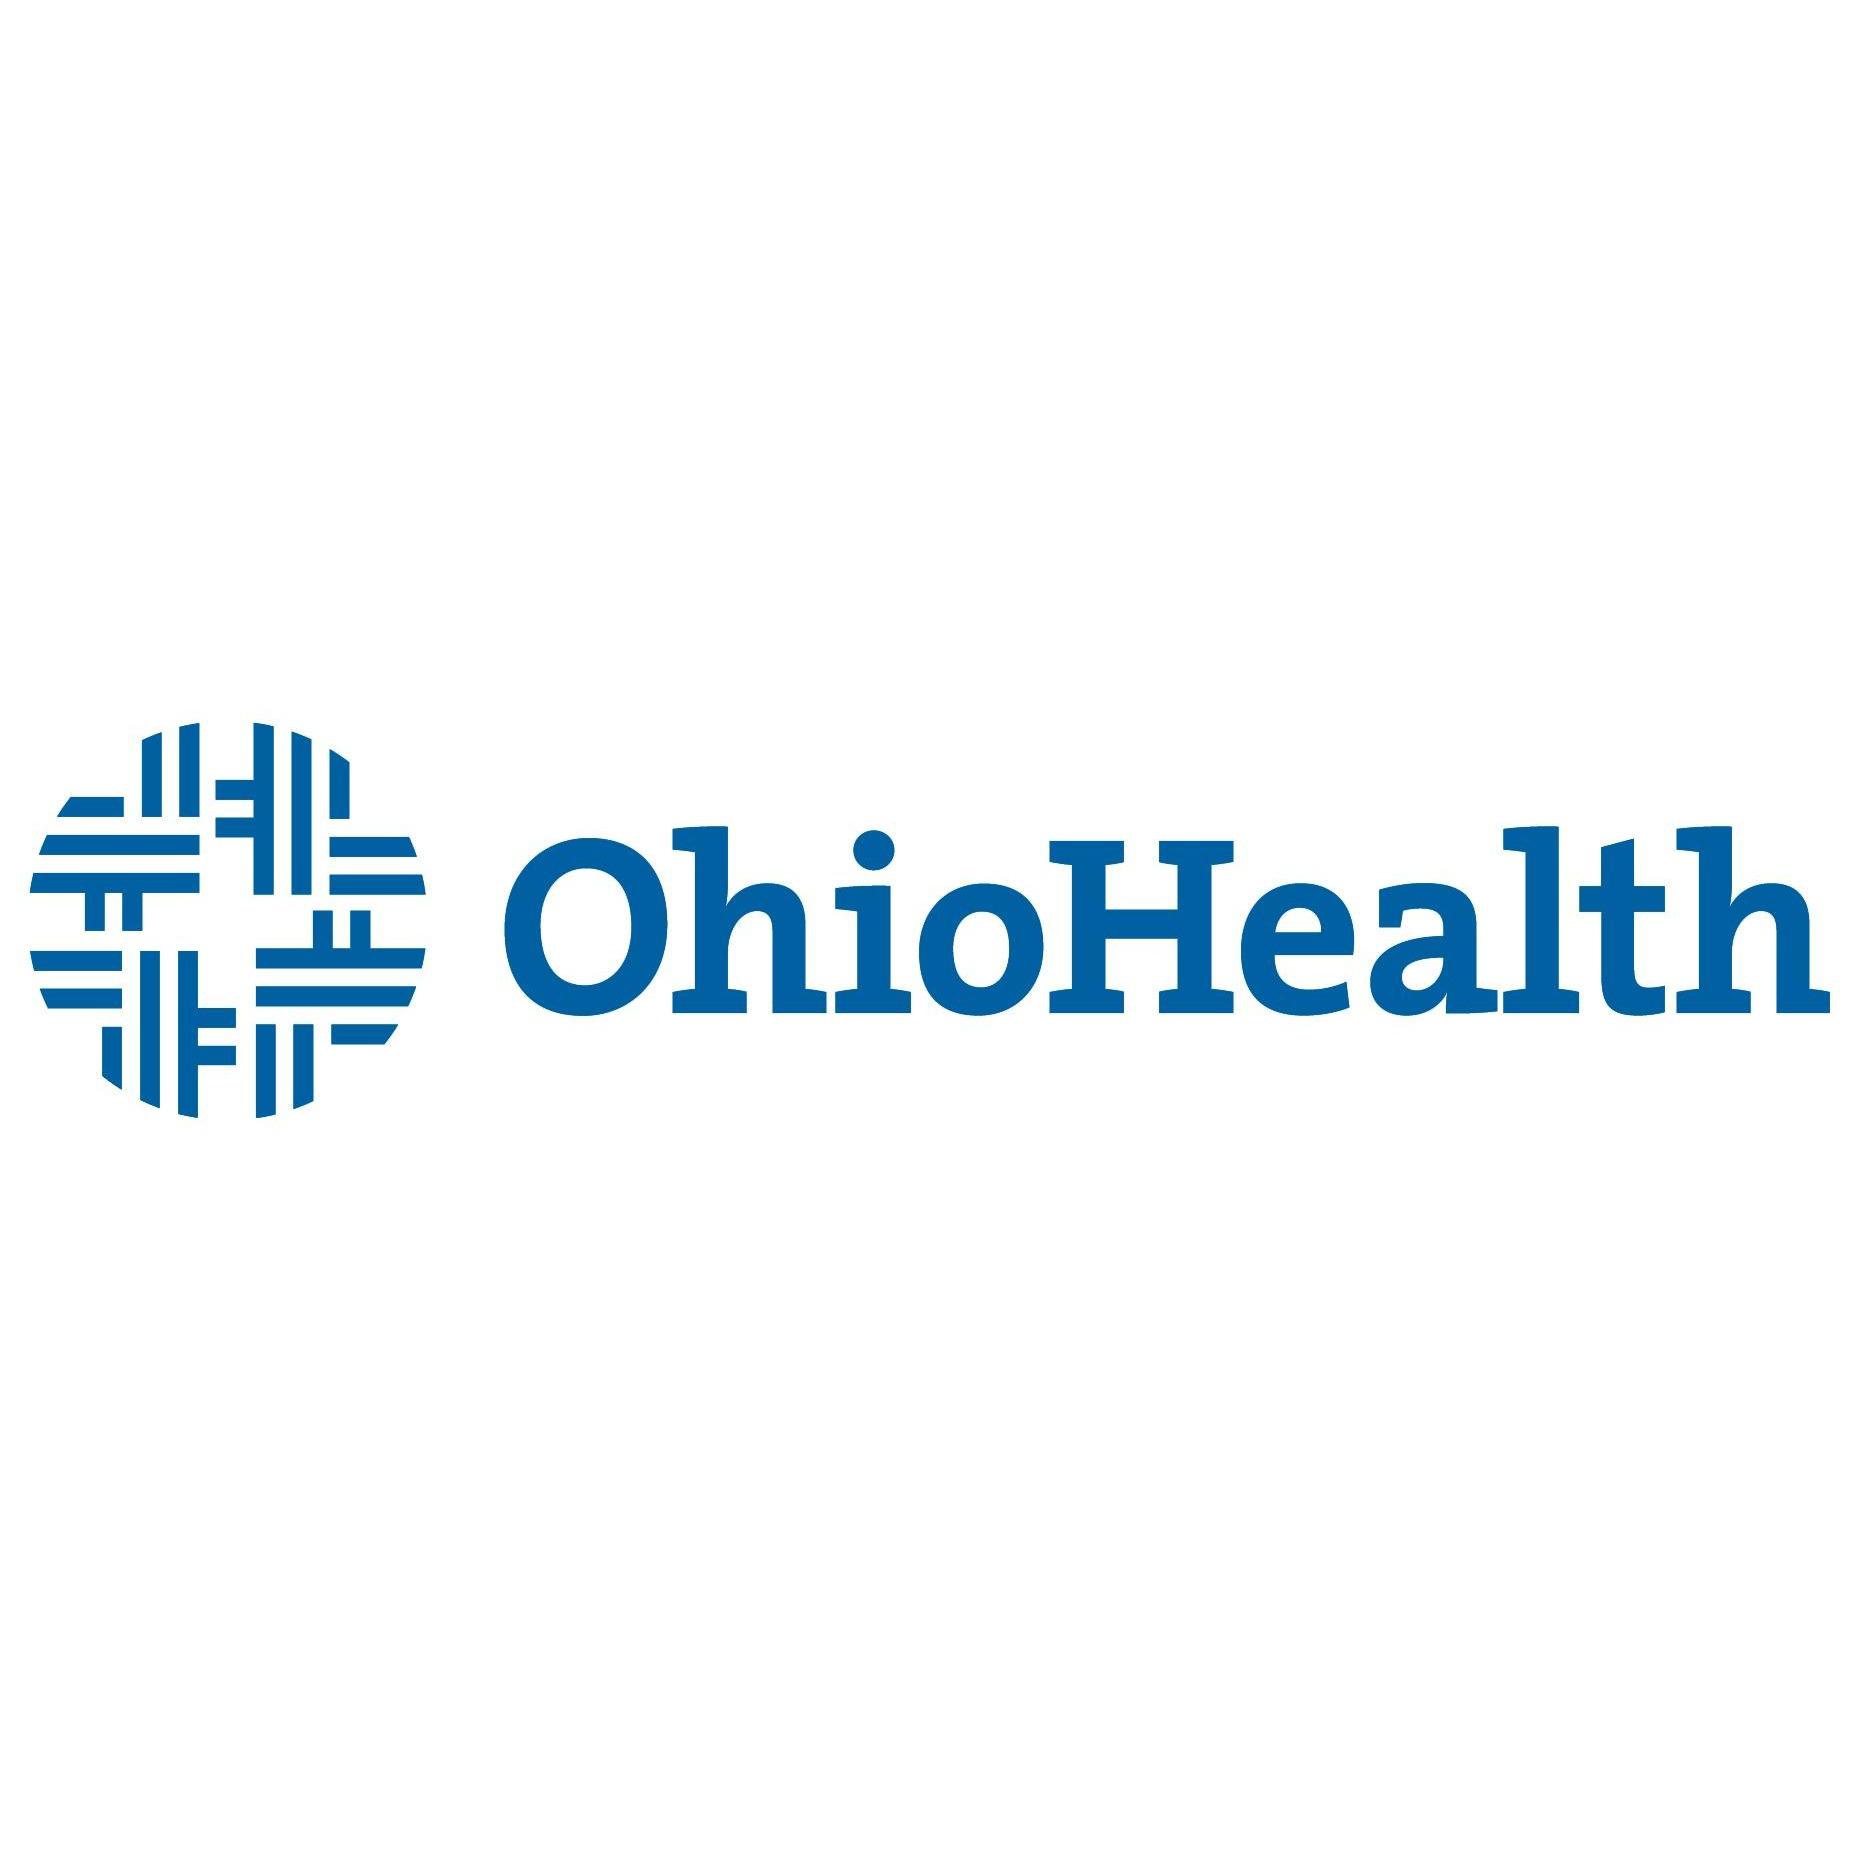 OhioHealth Physician Group Heart & Vascular - Marysville, OH 43040 - (614)544-1555 | ShowMeLocal.com